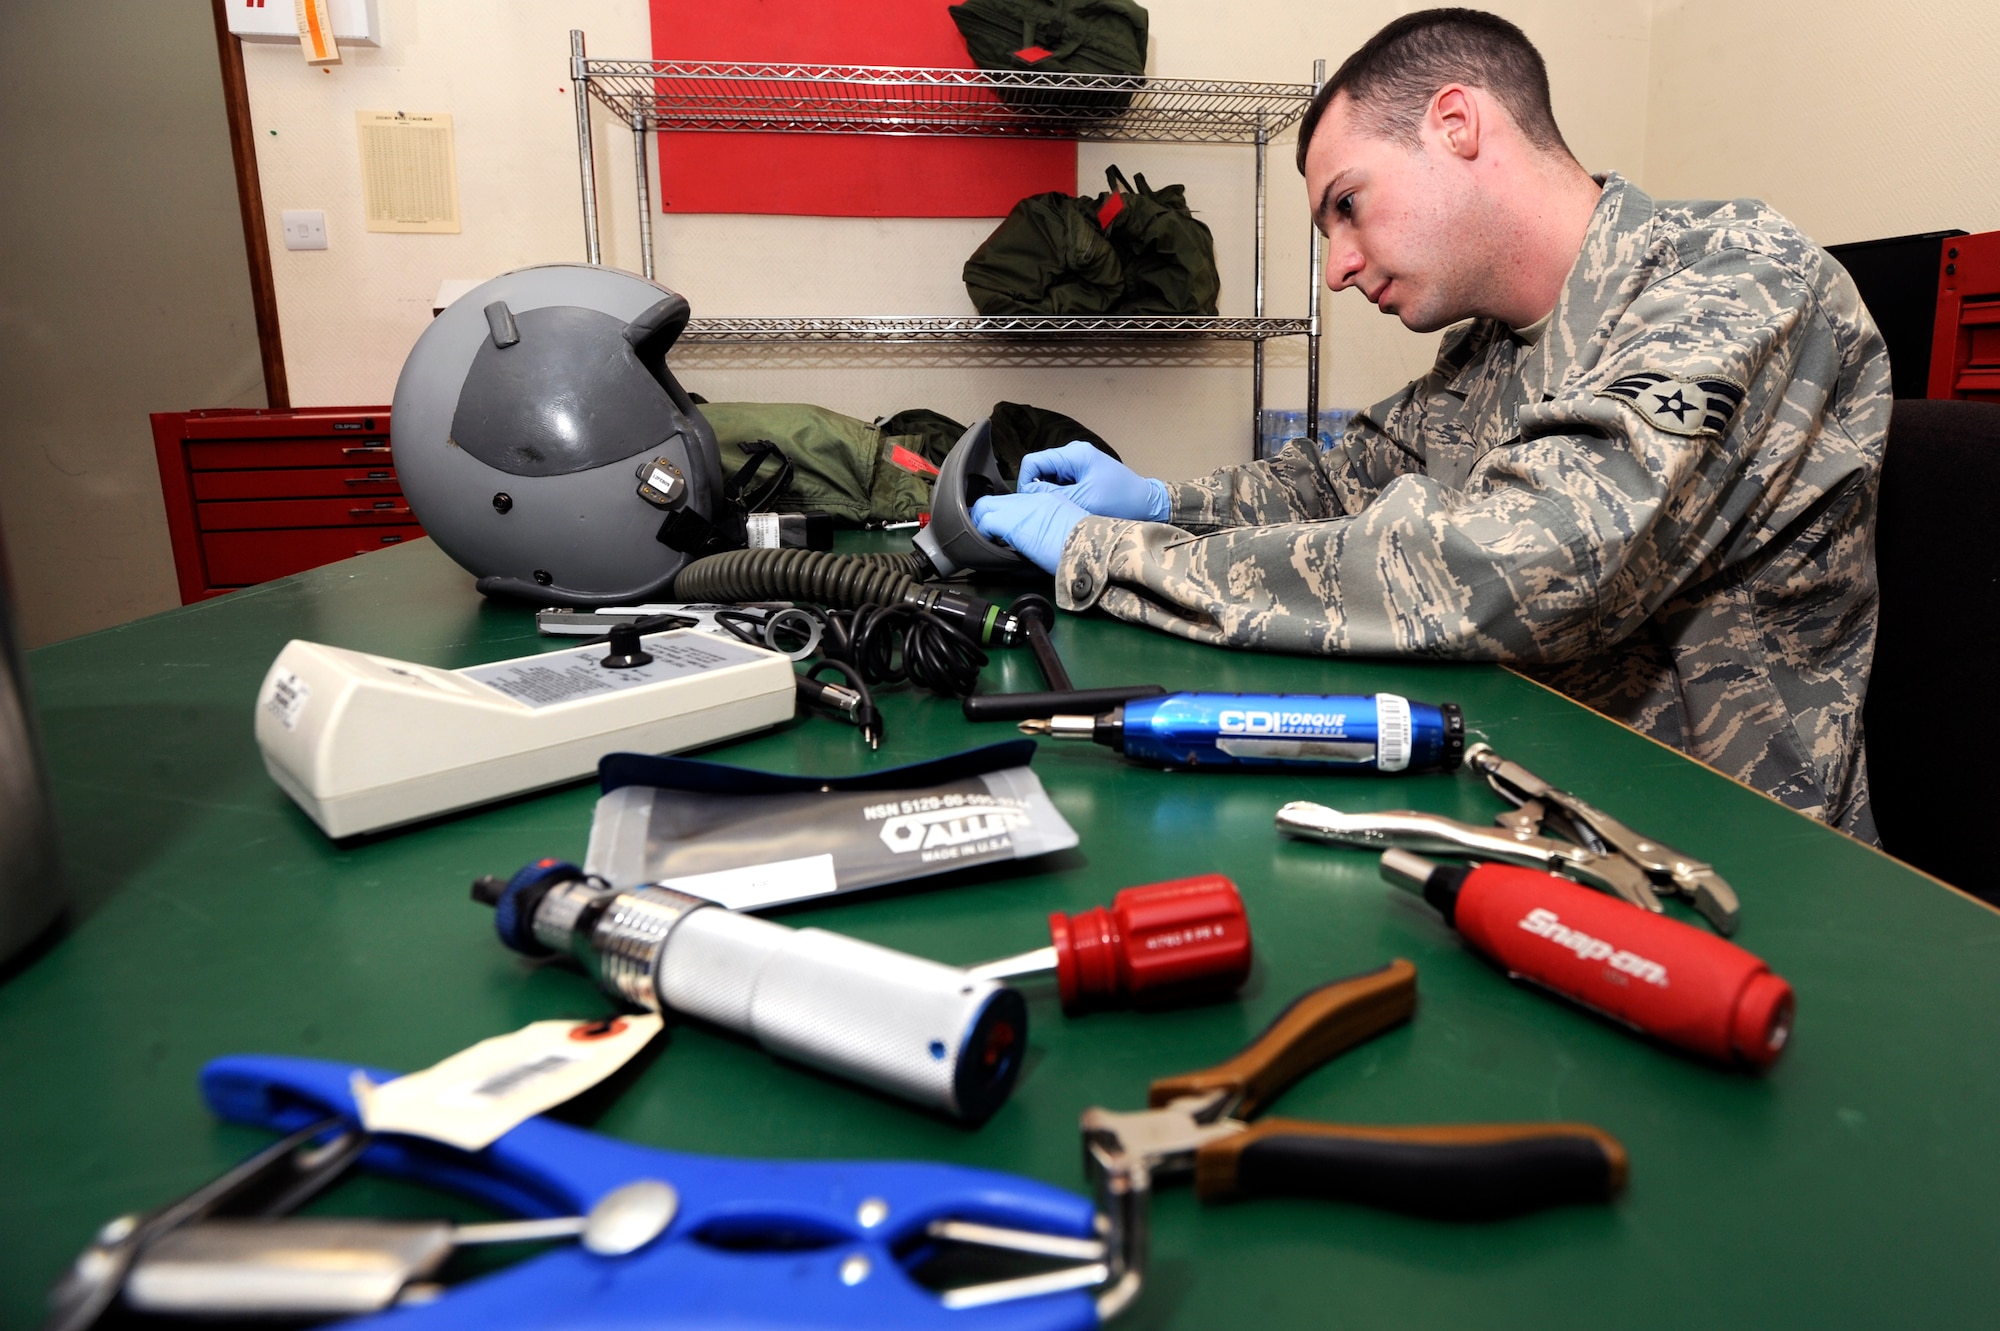 Senior Airman John Cumiskey, an aircrew flight equipment technician with the 379th Expeditionary Operations Support Squadron, performs a Periodic Maintenance Inspection on a HGU 55/P helmet, Feb. 10, 2009, in an undisclosed location in Southwest Asia.  The PMI is performed after every 90 days of use and every aspect of the helmet is checked for function.  Airman Cumiskey is native to Fairfield, Conn. and deployed from Offutt Air Force Base, Neb. in support of Operations Iraqi and Enduring Freedom and Combined Joint Task Force - Horn of Africa. (U.S. Air Force Photo by Staff Sgt. Joshua Garcia/released)